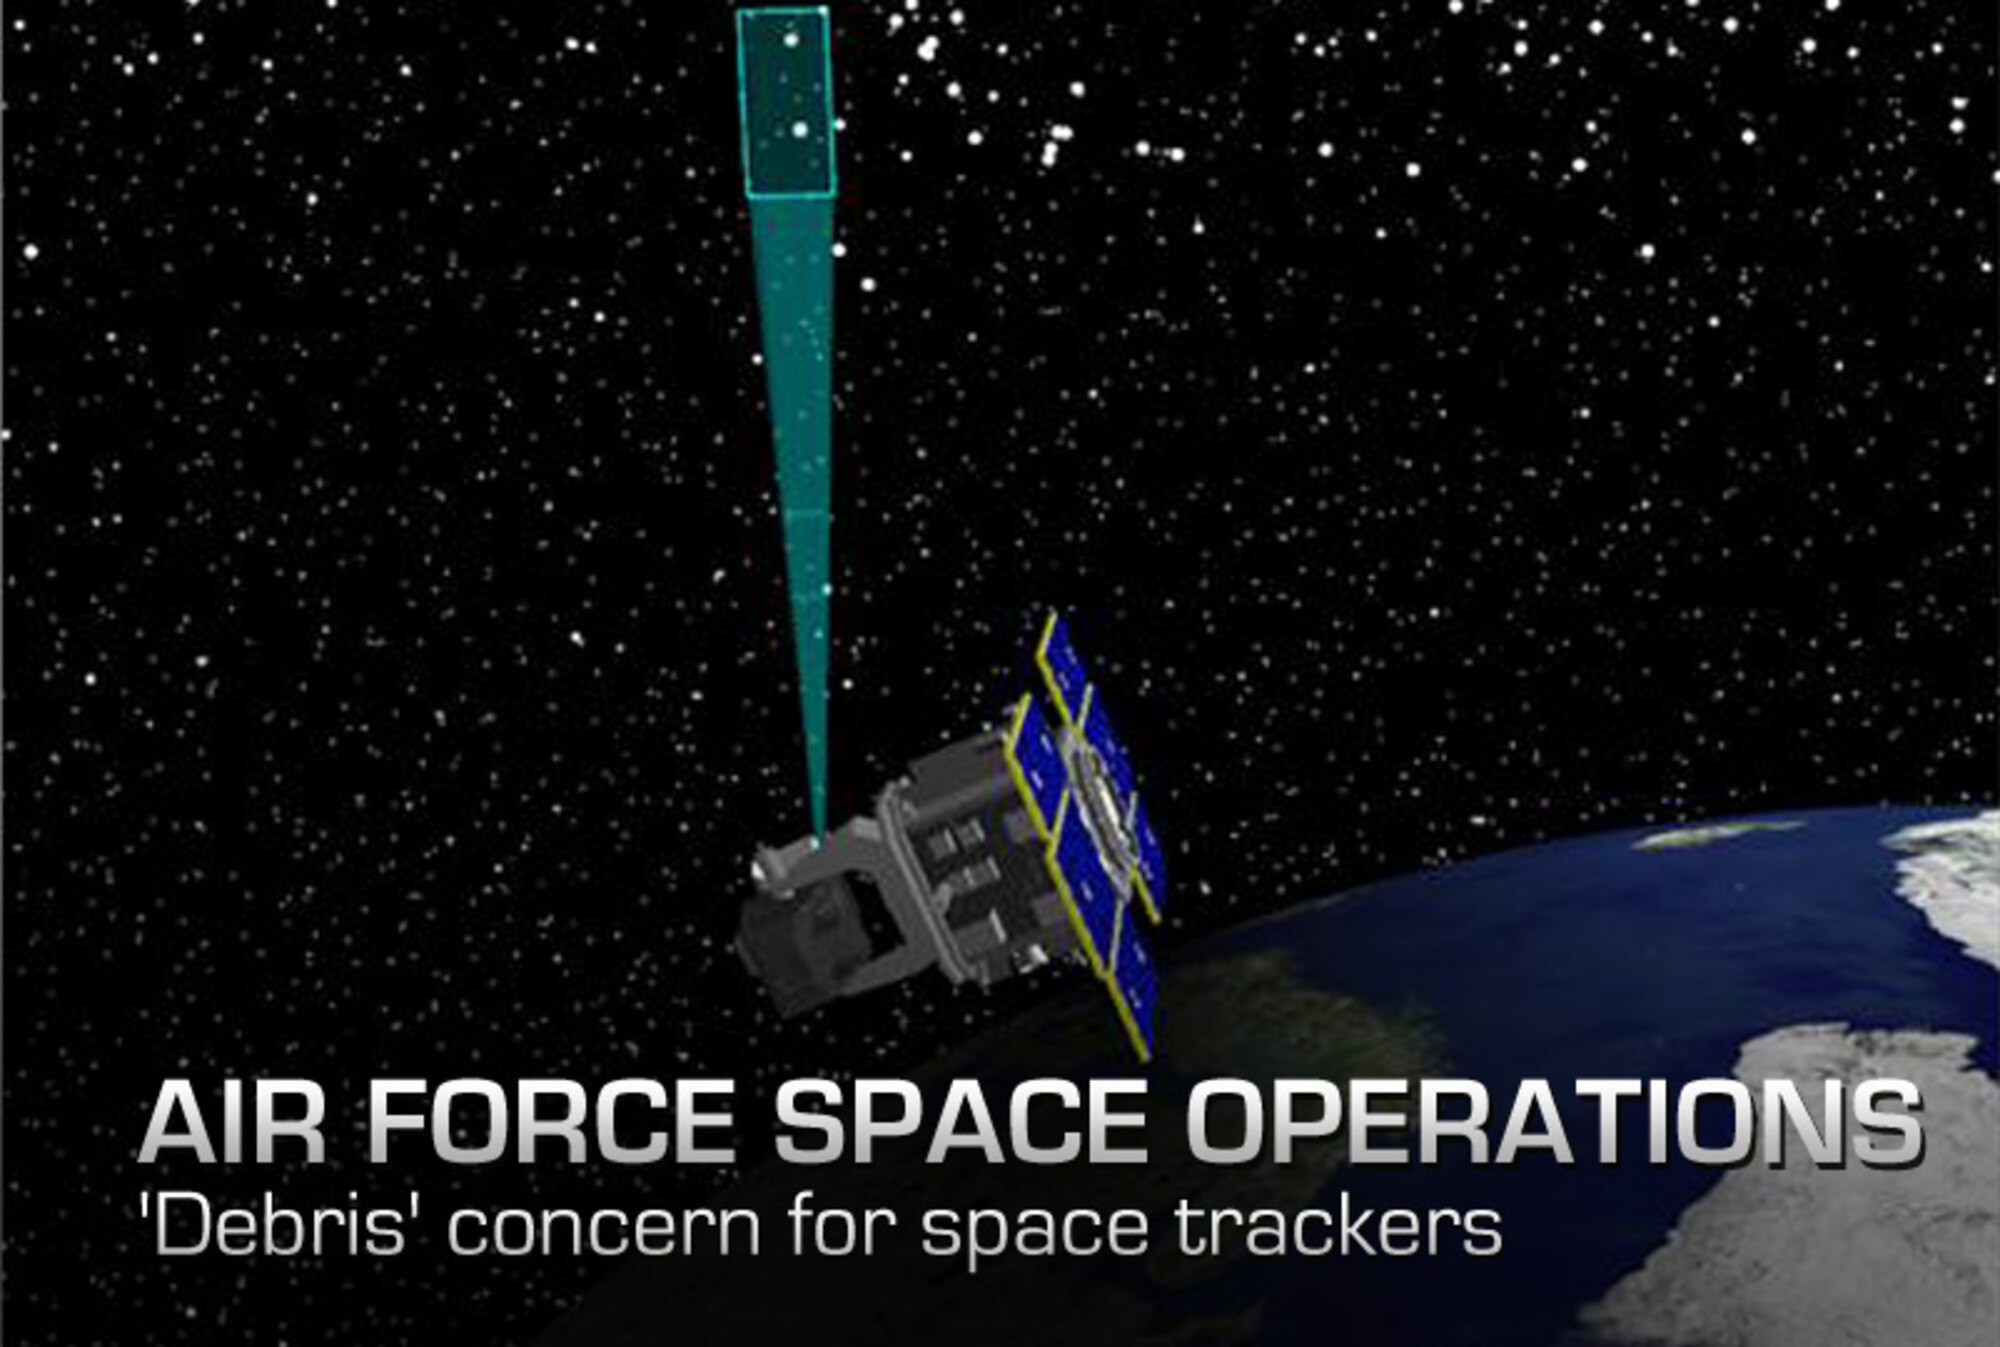 An artist's depiction of the Space Based Space Surveillance satellite. The Joint Space Operations Center uses data collected from SBSS to track orbiting objects in geostationary and low earth orbit, providng space situational awareness to U.S. miliitary and commercial space users. Members of the 1st and 7th Space Operations Squadron command and control the satellite